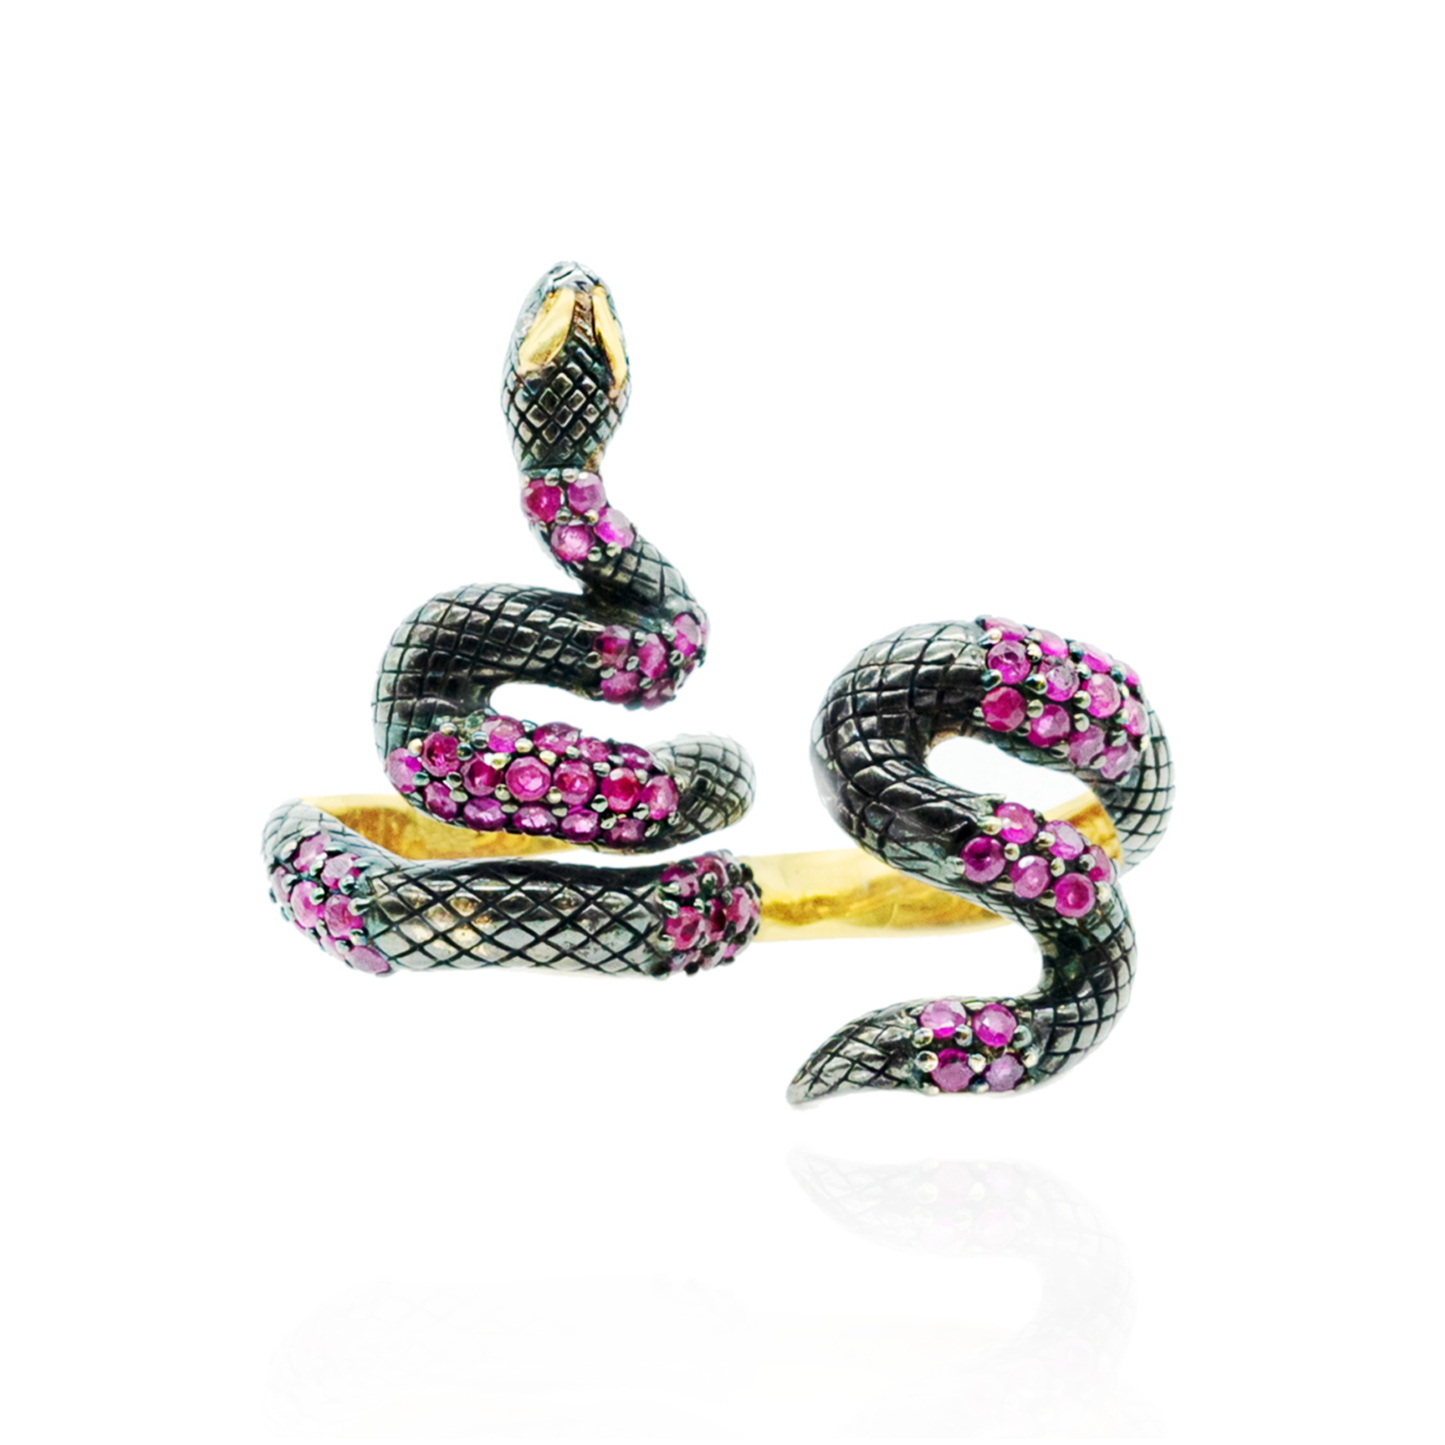 925 Silver Double Finger Snake Ring Plated in Black Rhodium with Rubies